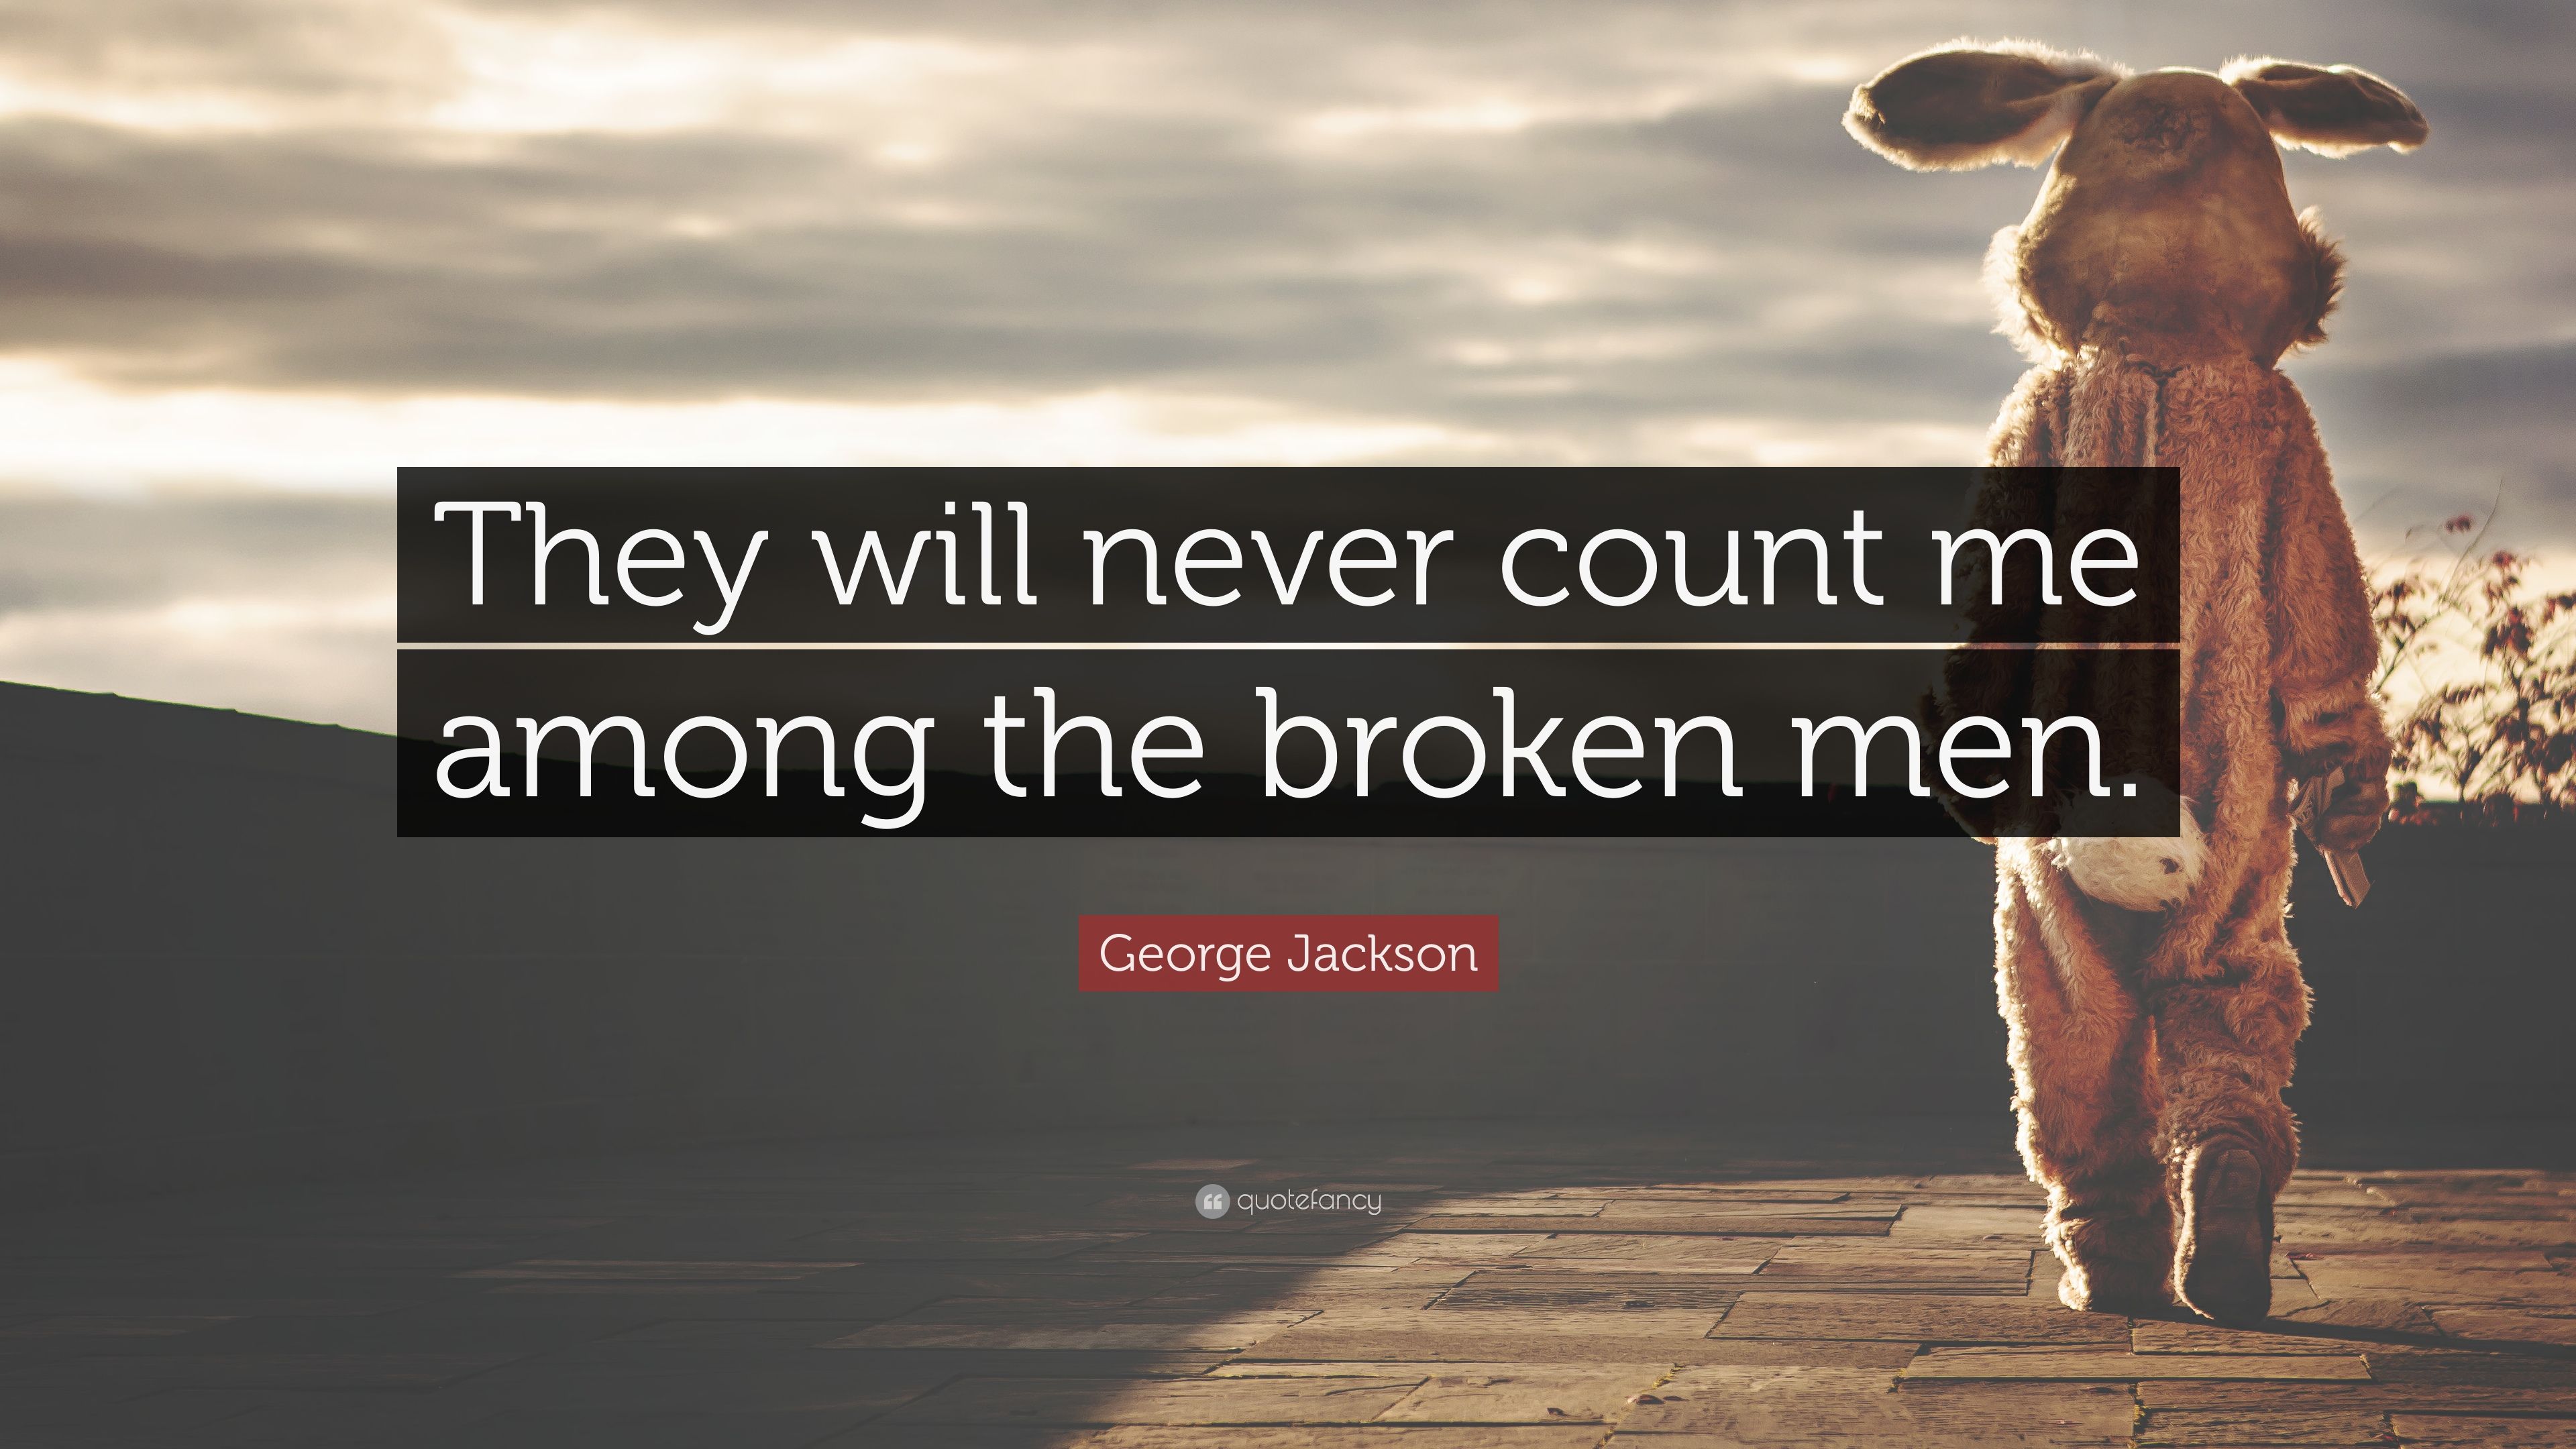 George Jackson Quote: “They will never count me among the broken men.”